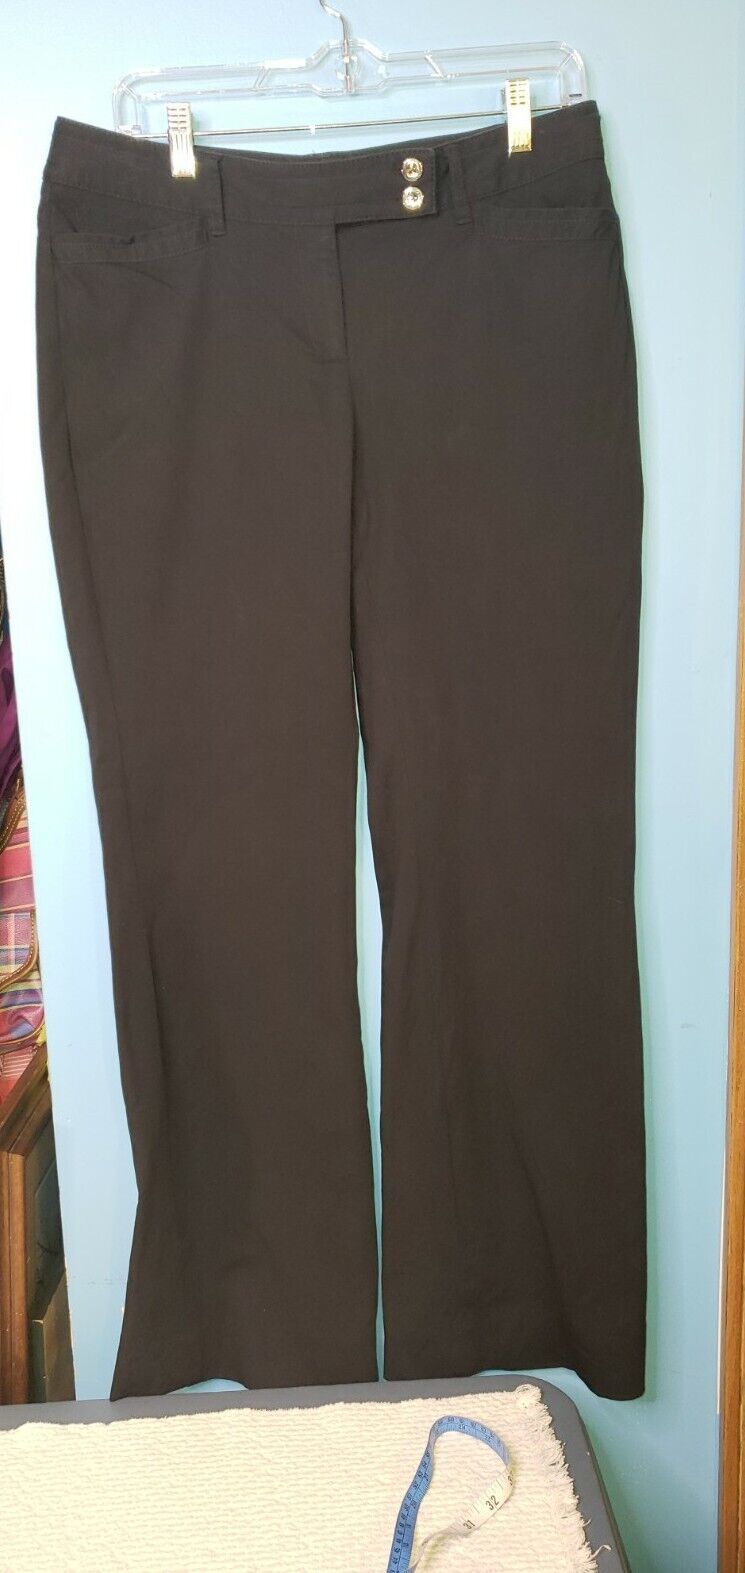 Primary image for White House Black Market Modern Boot Womens Dress Pants Flat Front Black Size 8R